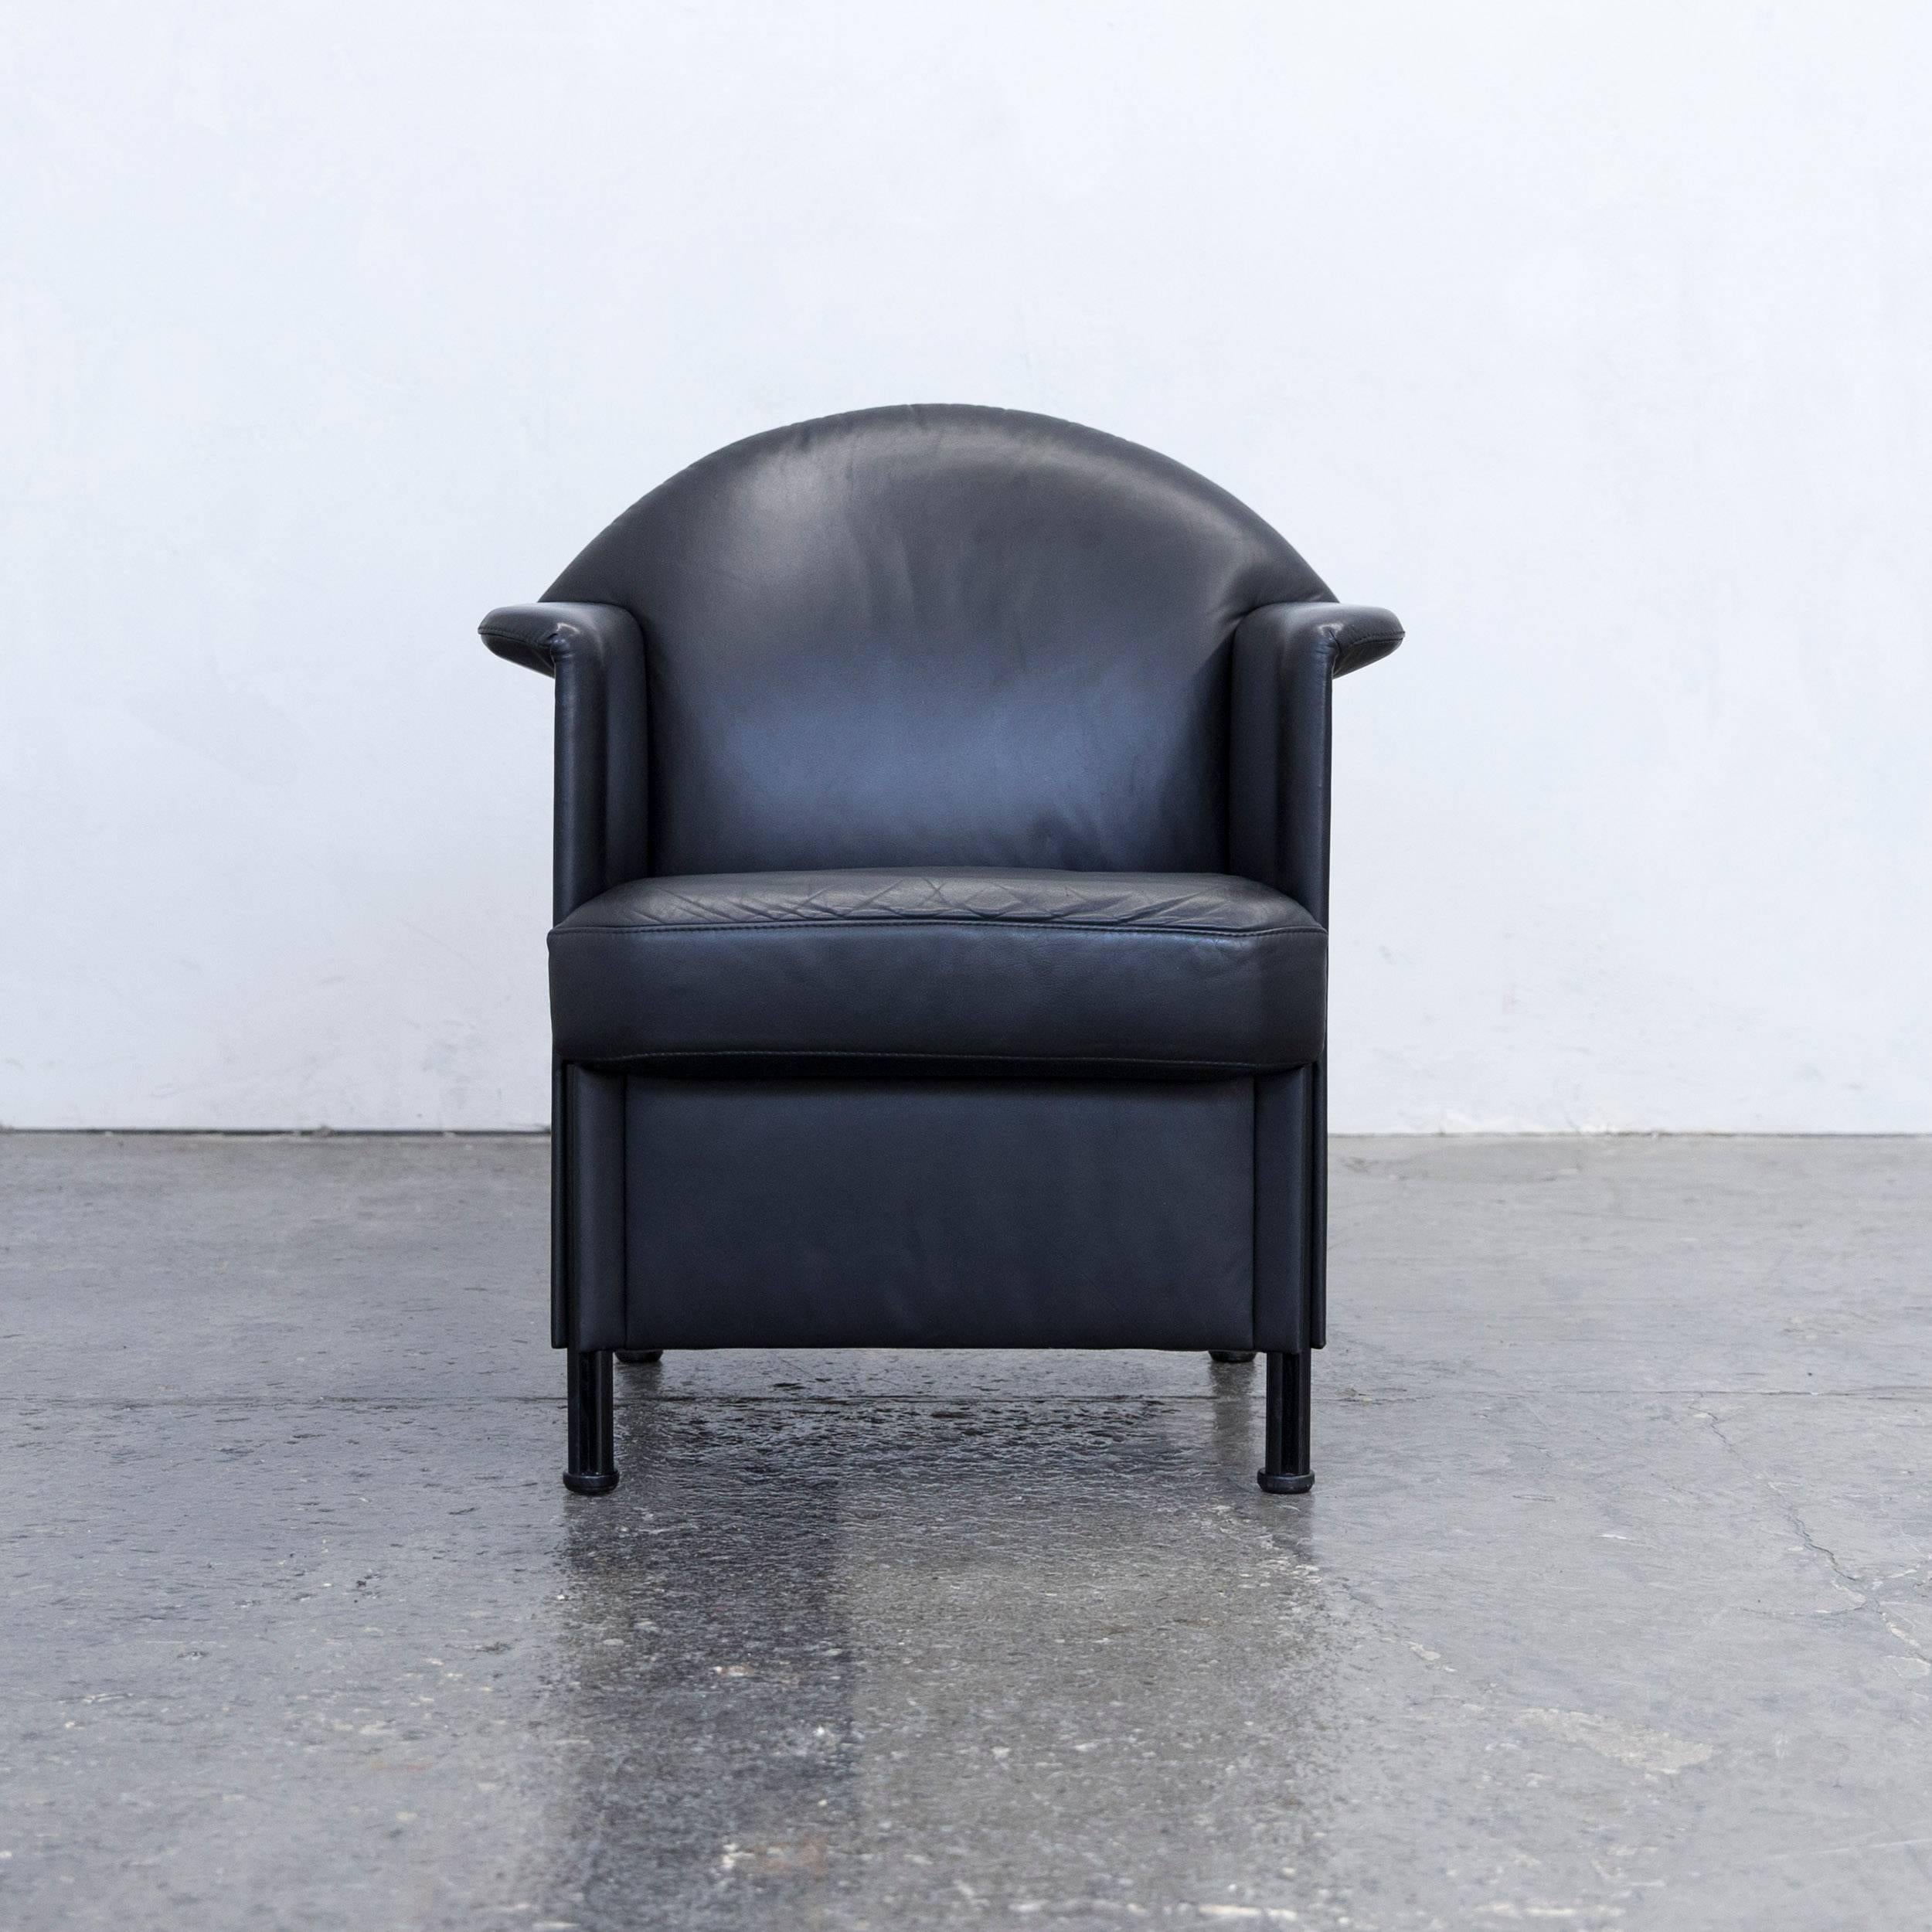 Black colored original COR designer leather armchair in a minimalistic and modern design, made for pure comfort.